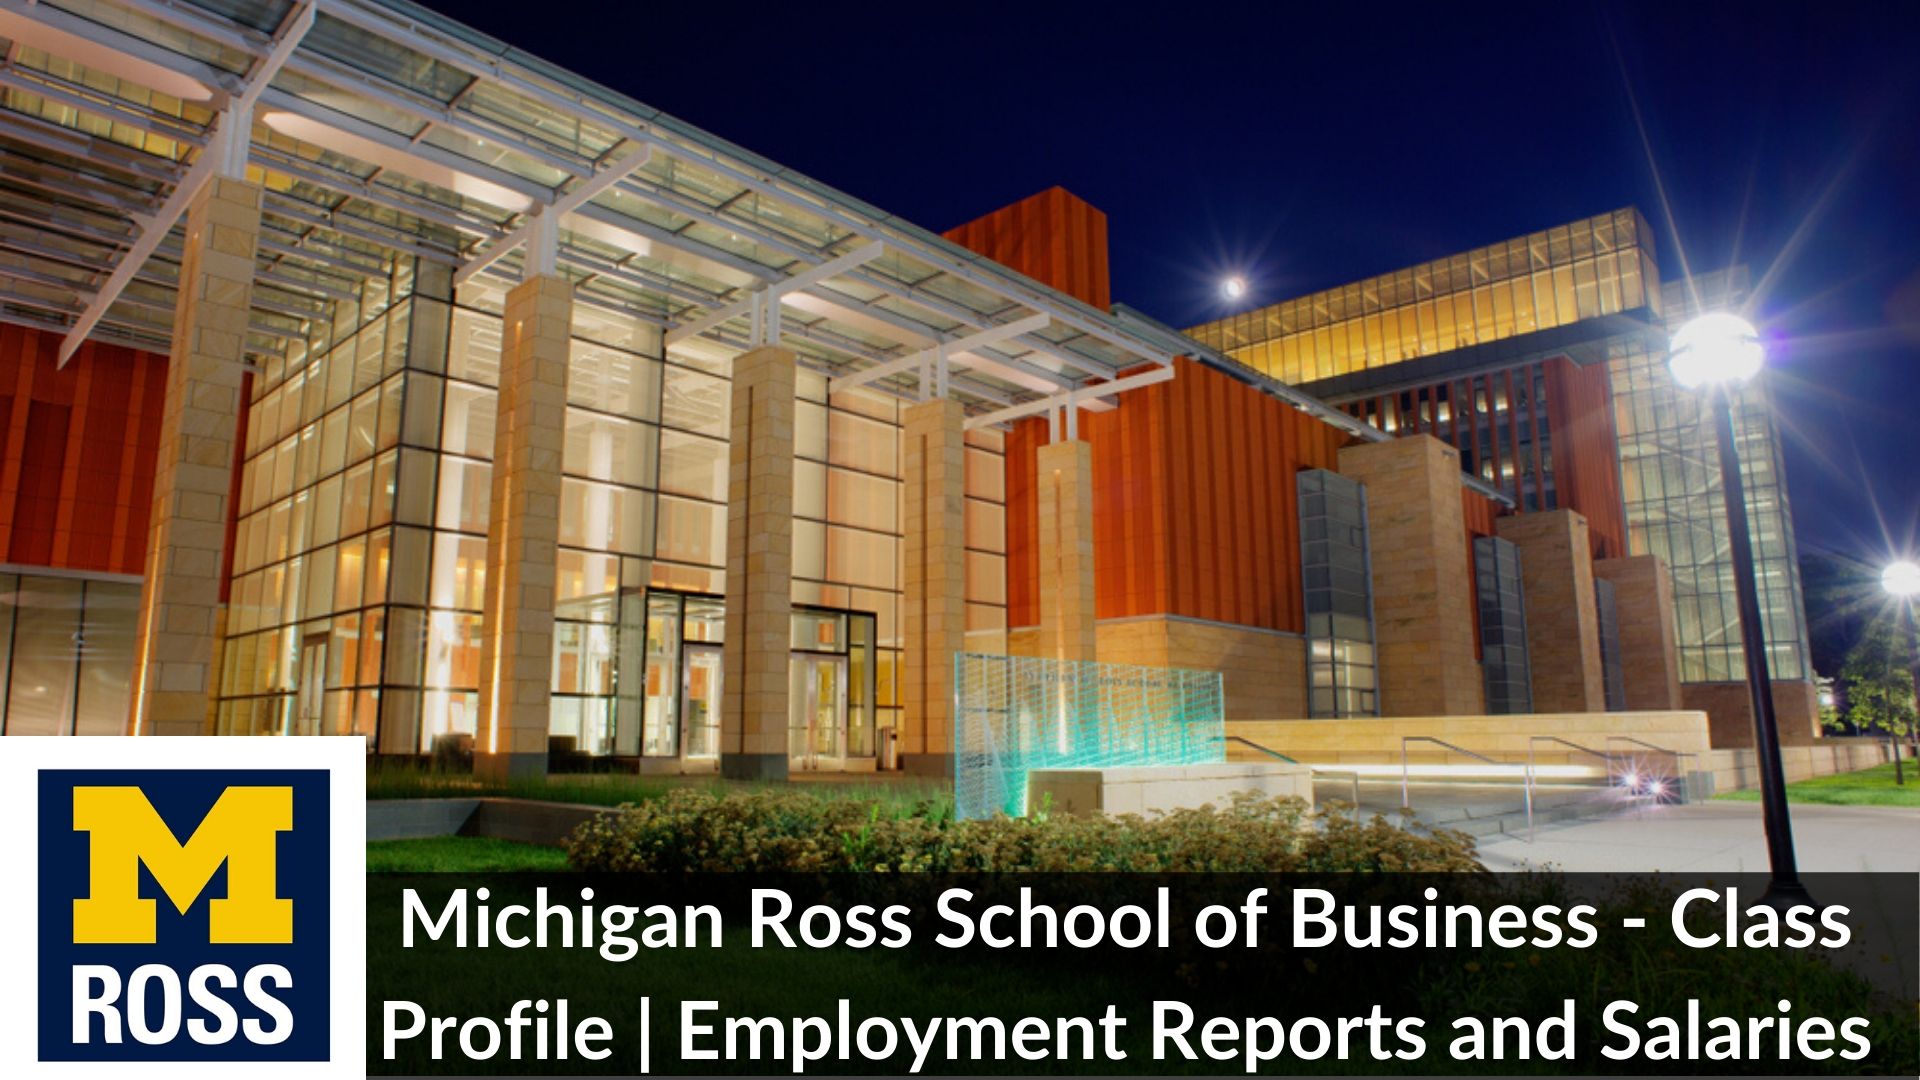 Michigan-Ross-School-of-Business-Class-Profile-_-Employment-Reports-and-Salaries.jpg